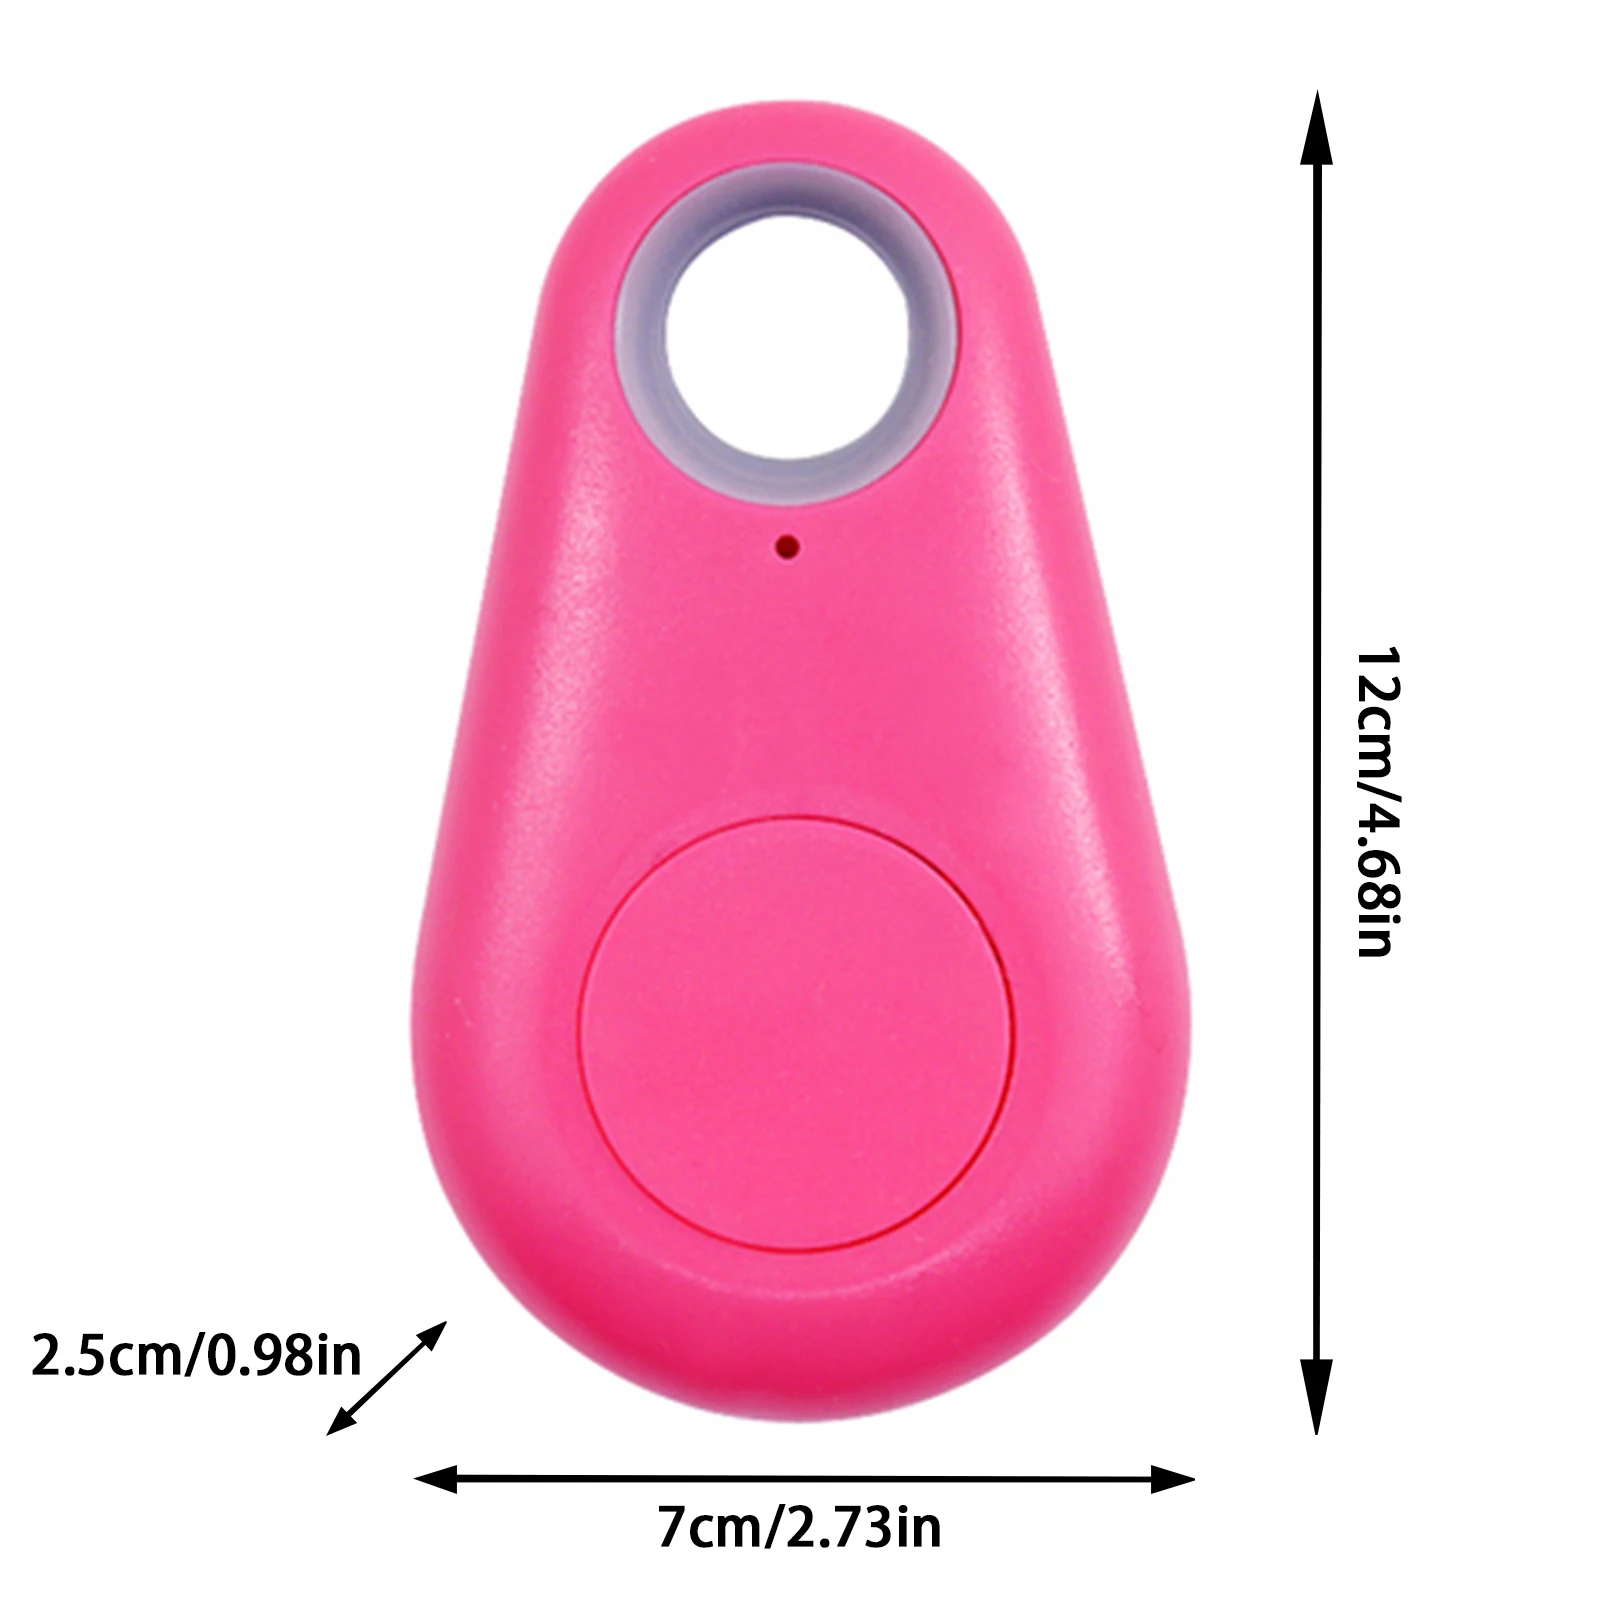 Anti-lost Alarm 4.0 Smart Pets GPS Tracker Tag Wireless Bluetooth Tracker Child Bags Wallet Phone Key Finder Locator Tracker images - 6